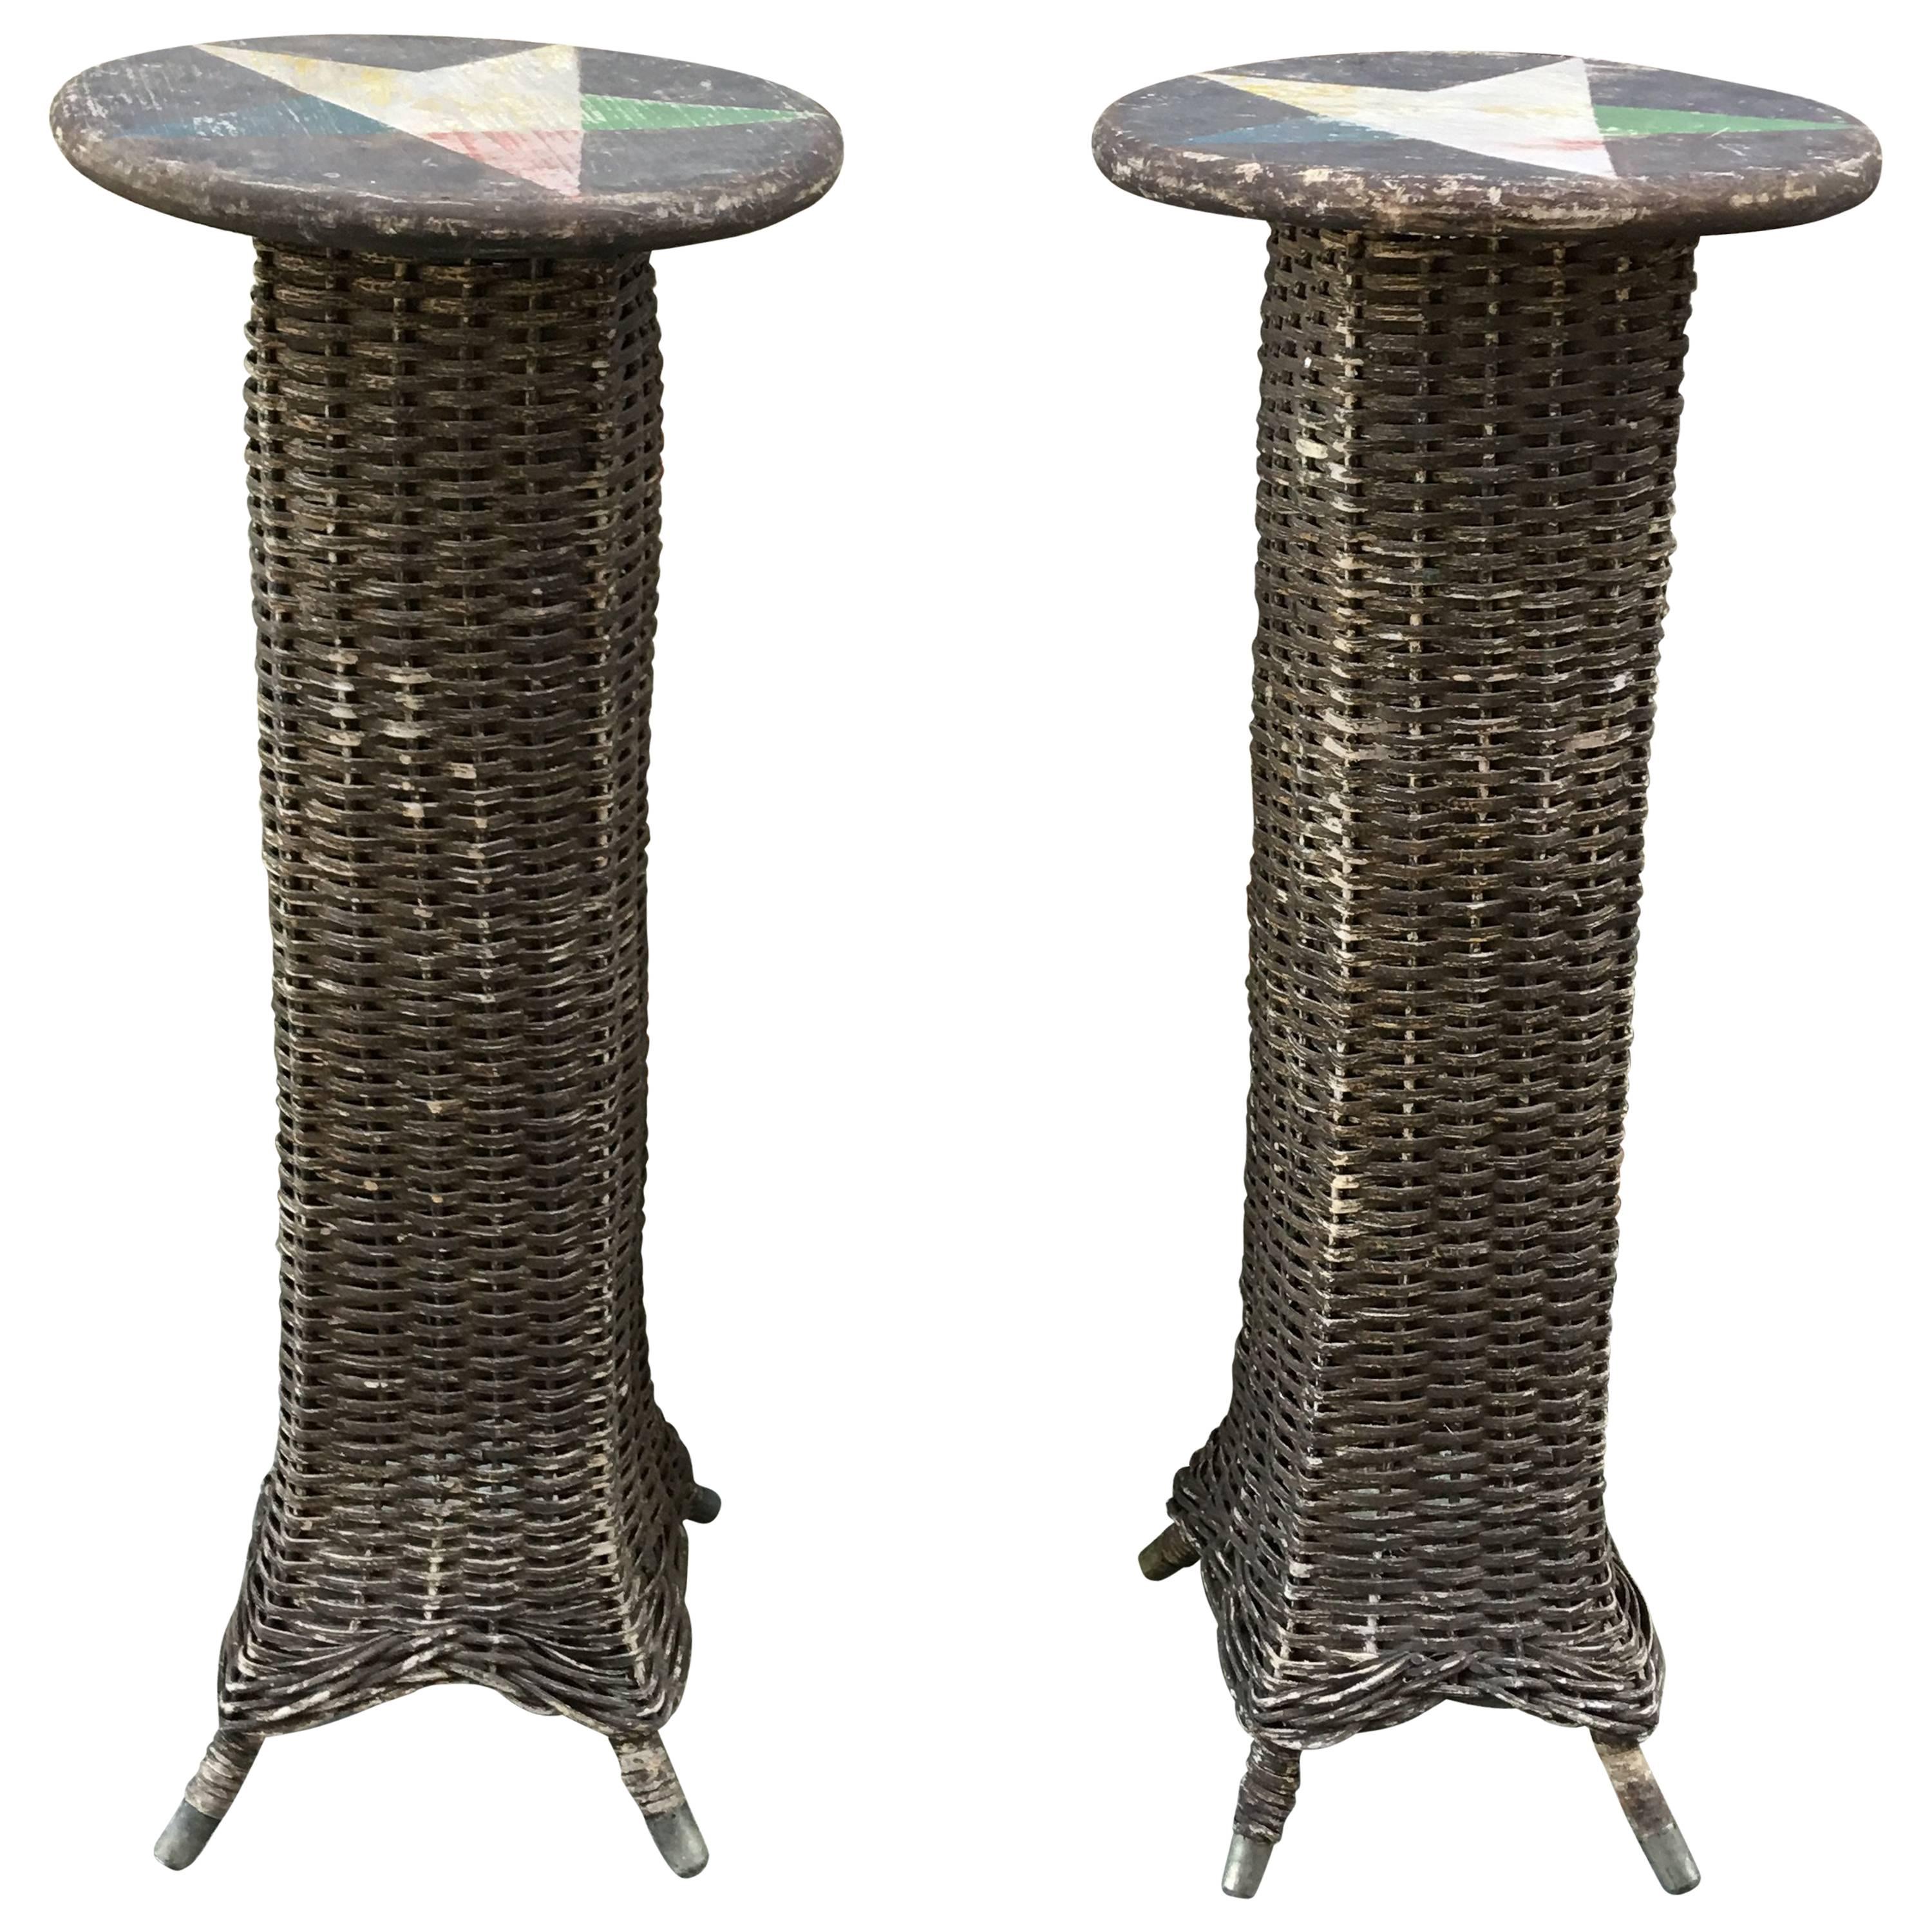 Pair of Wicker Plant Stands with Star Motif Tops